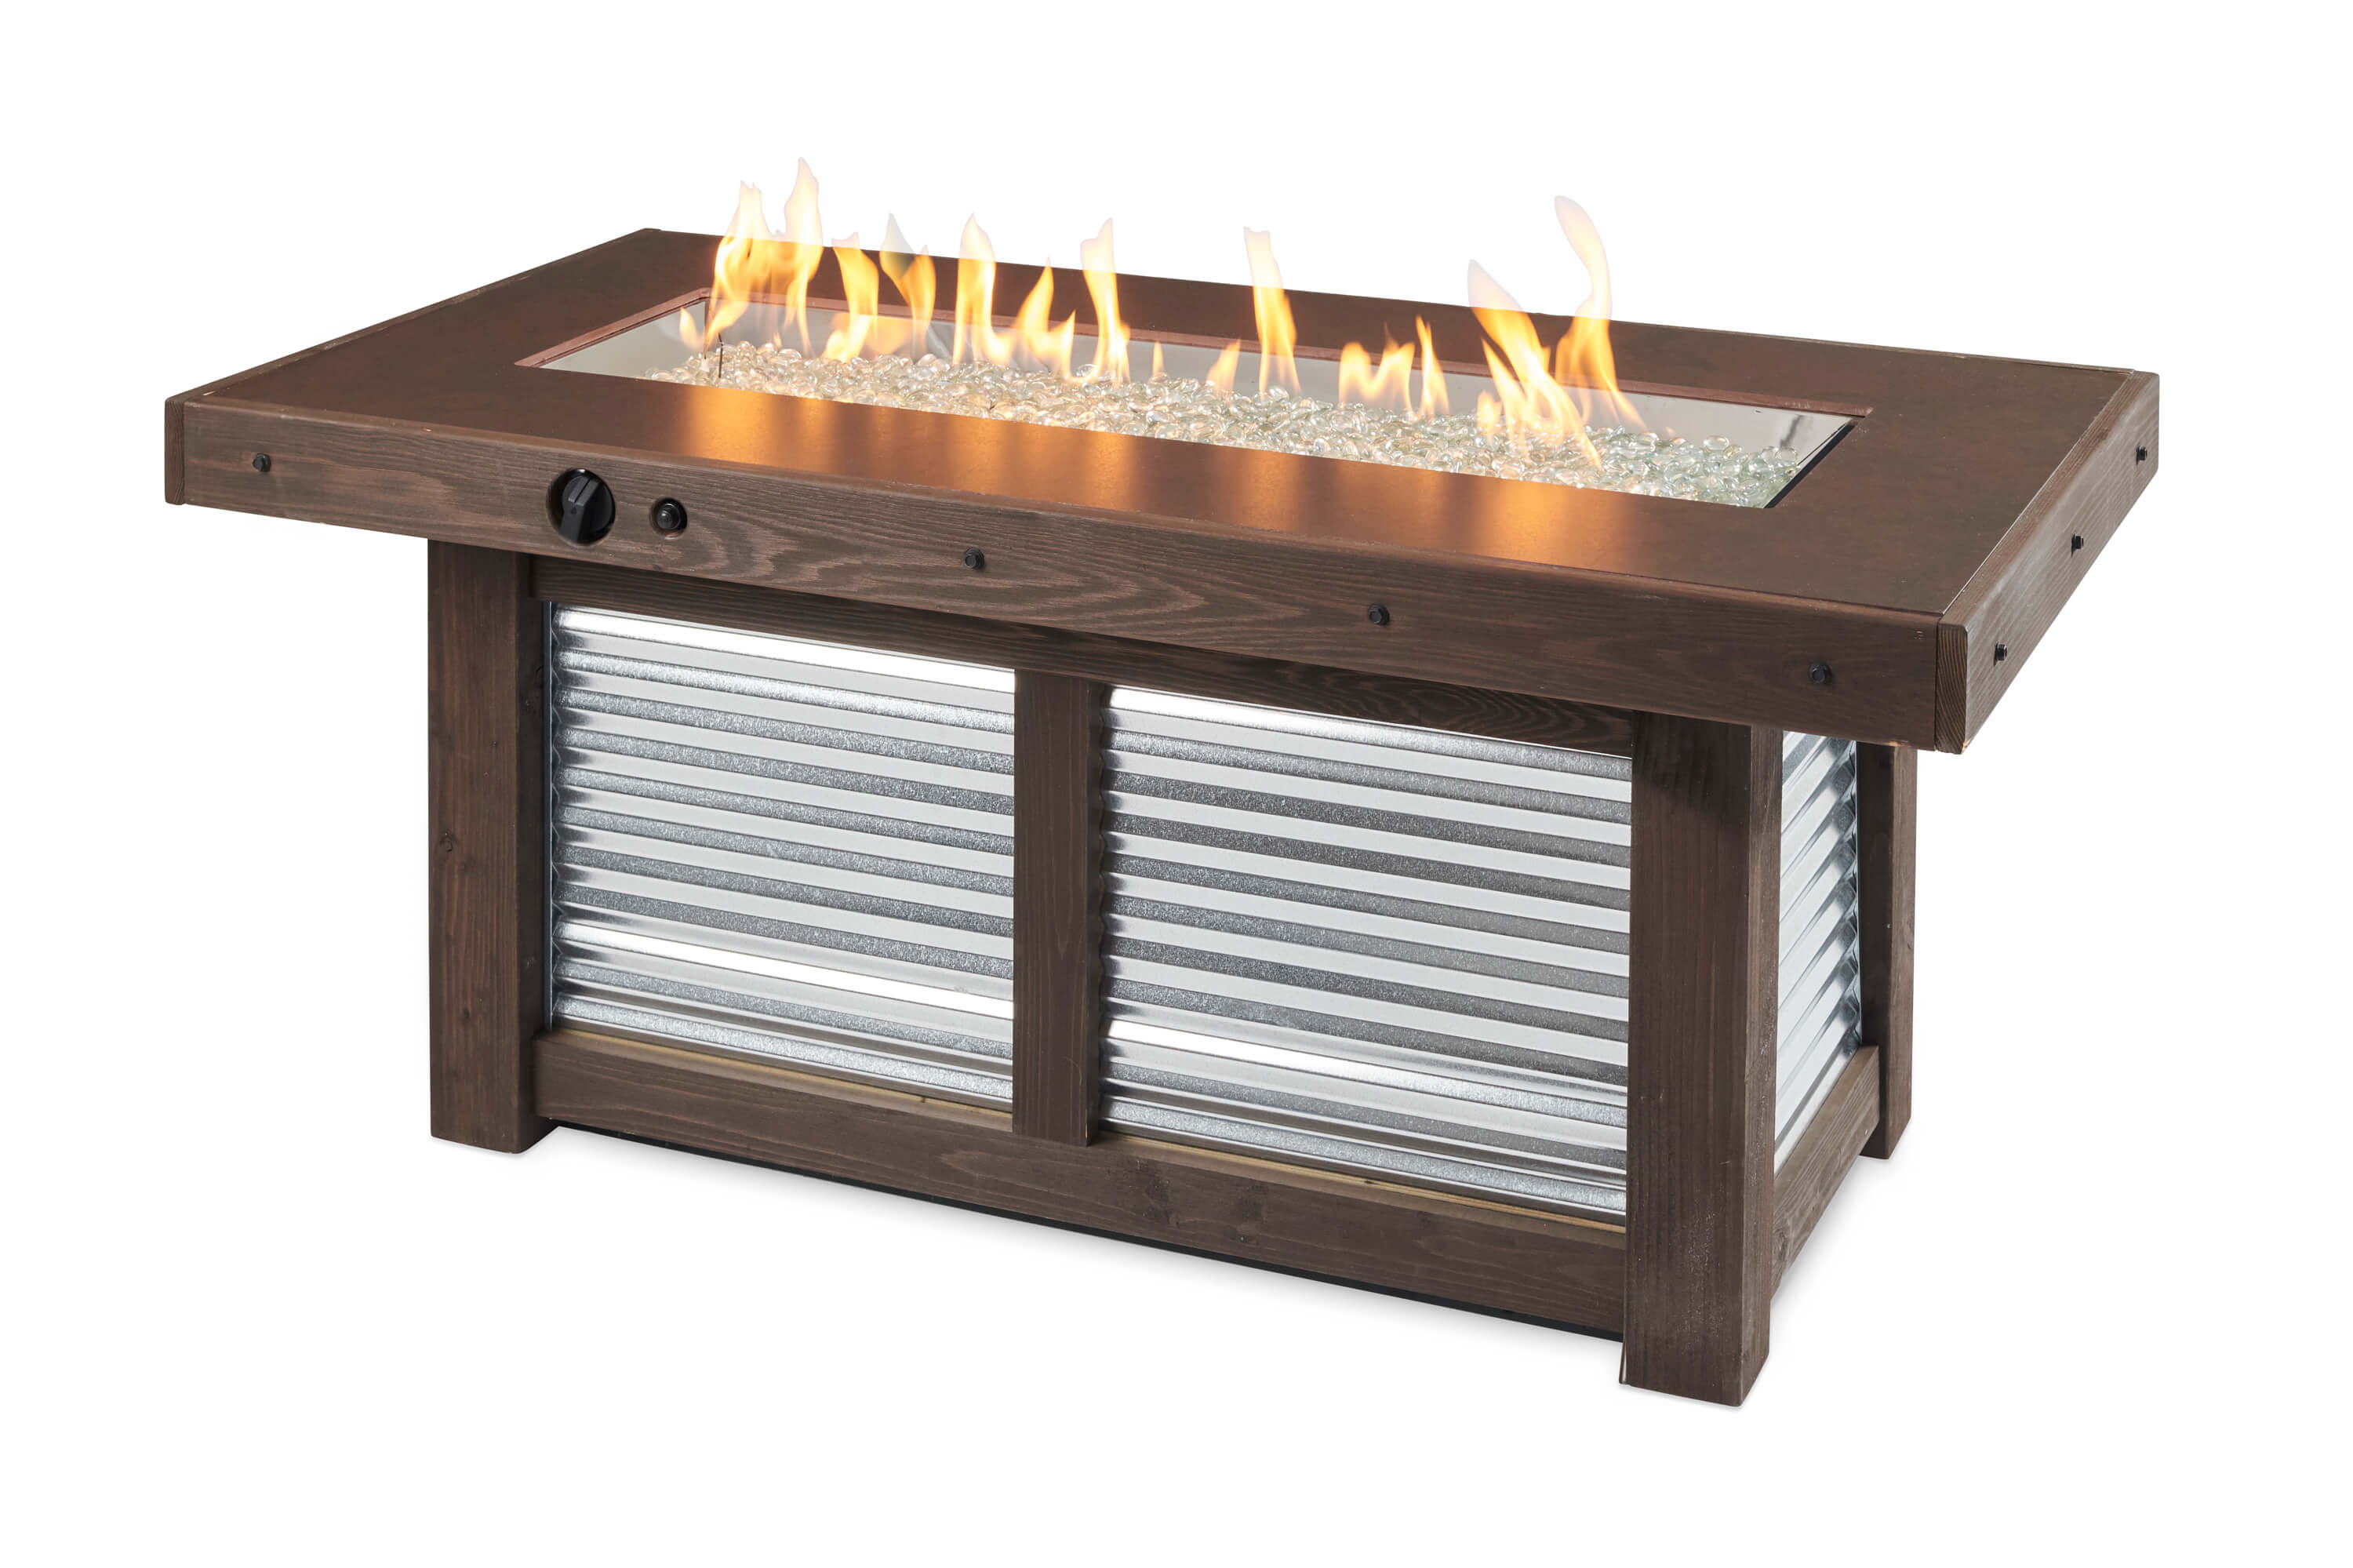 Denali Brew Fire Pit Table Cloister, Crystal Fire Pit